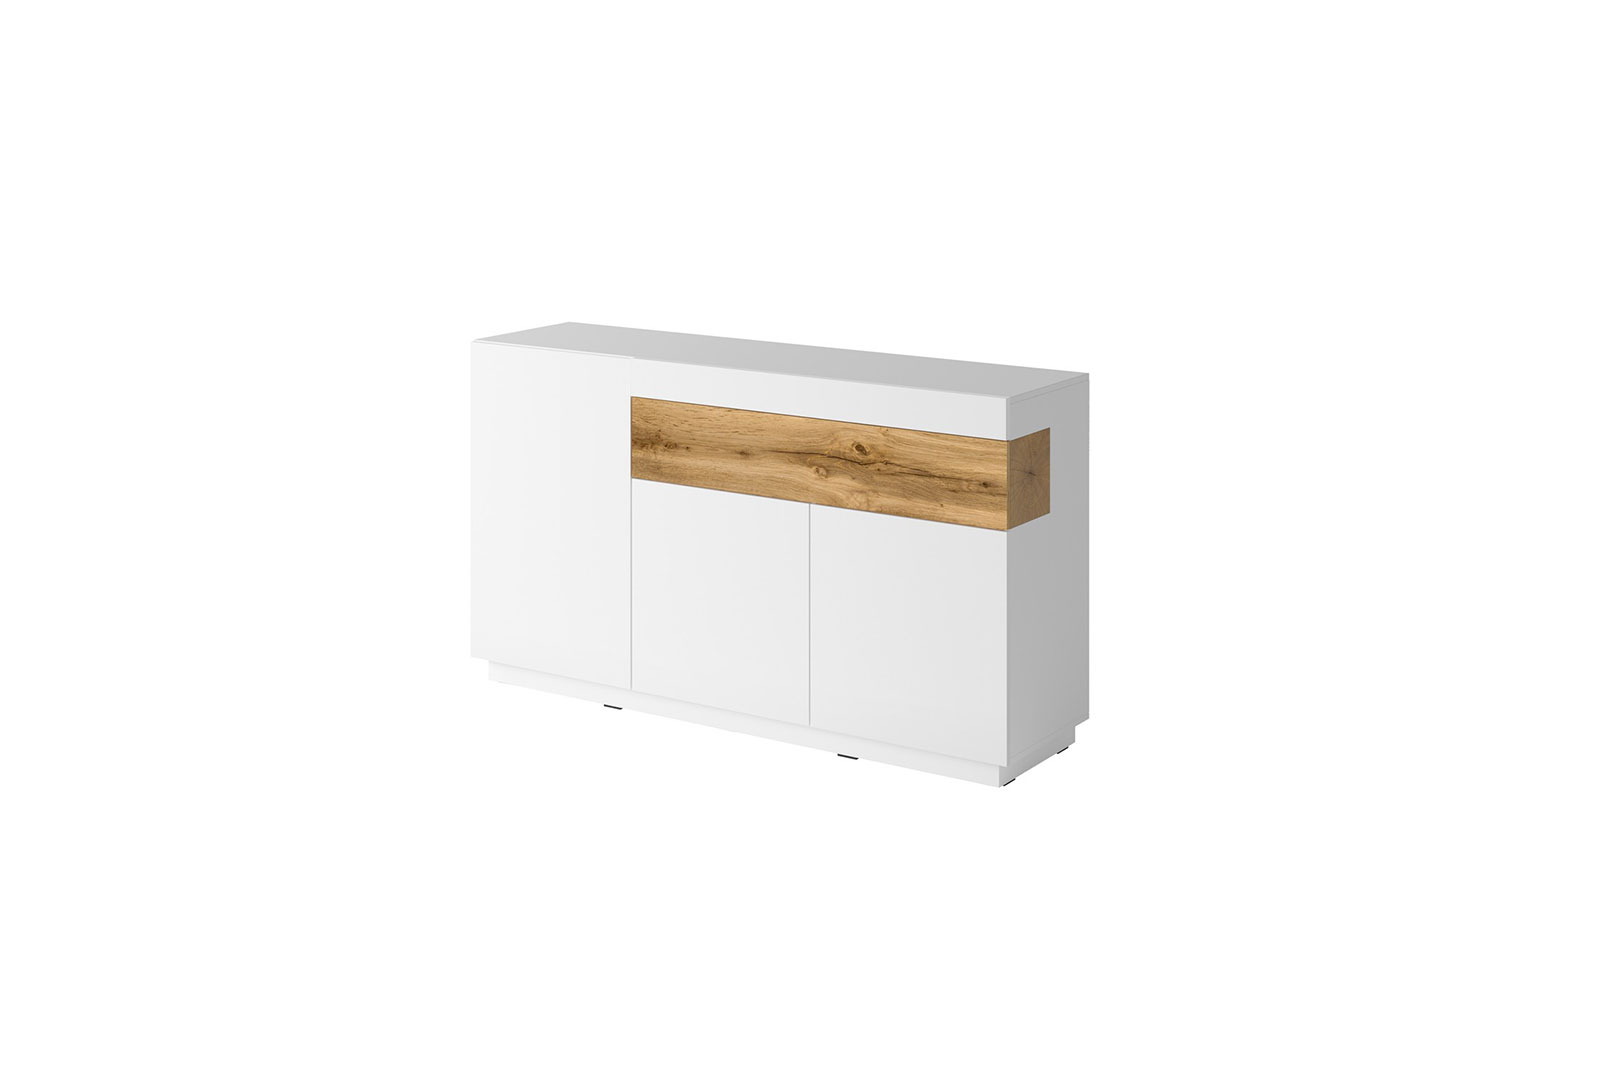 3D1S TYPE 43 CHEST OF DRAWERS